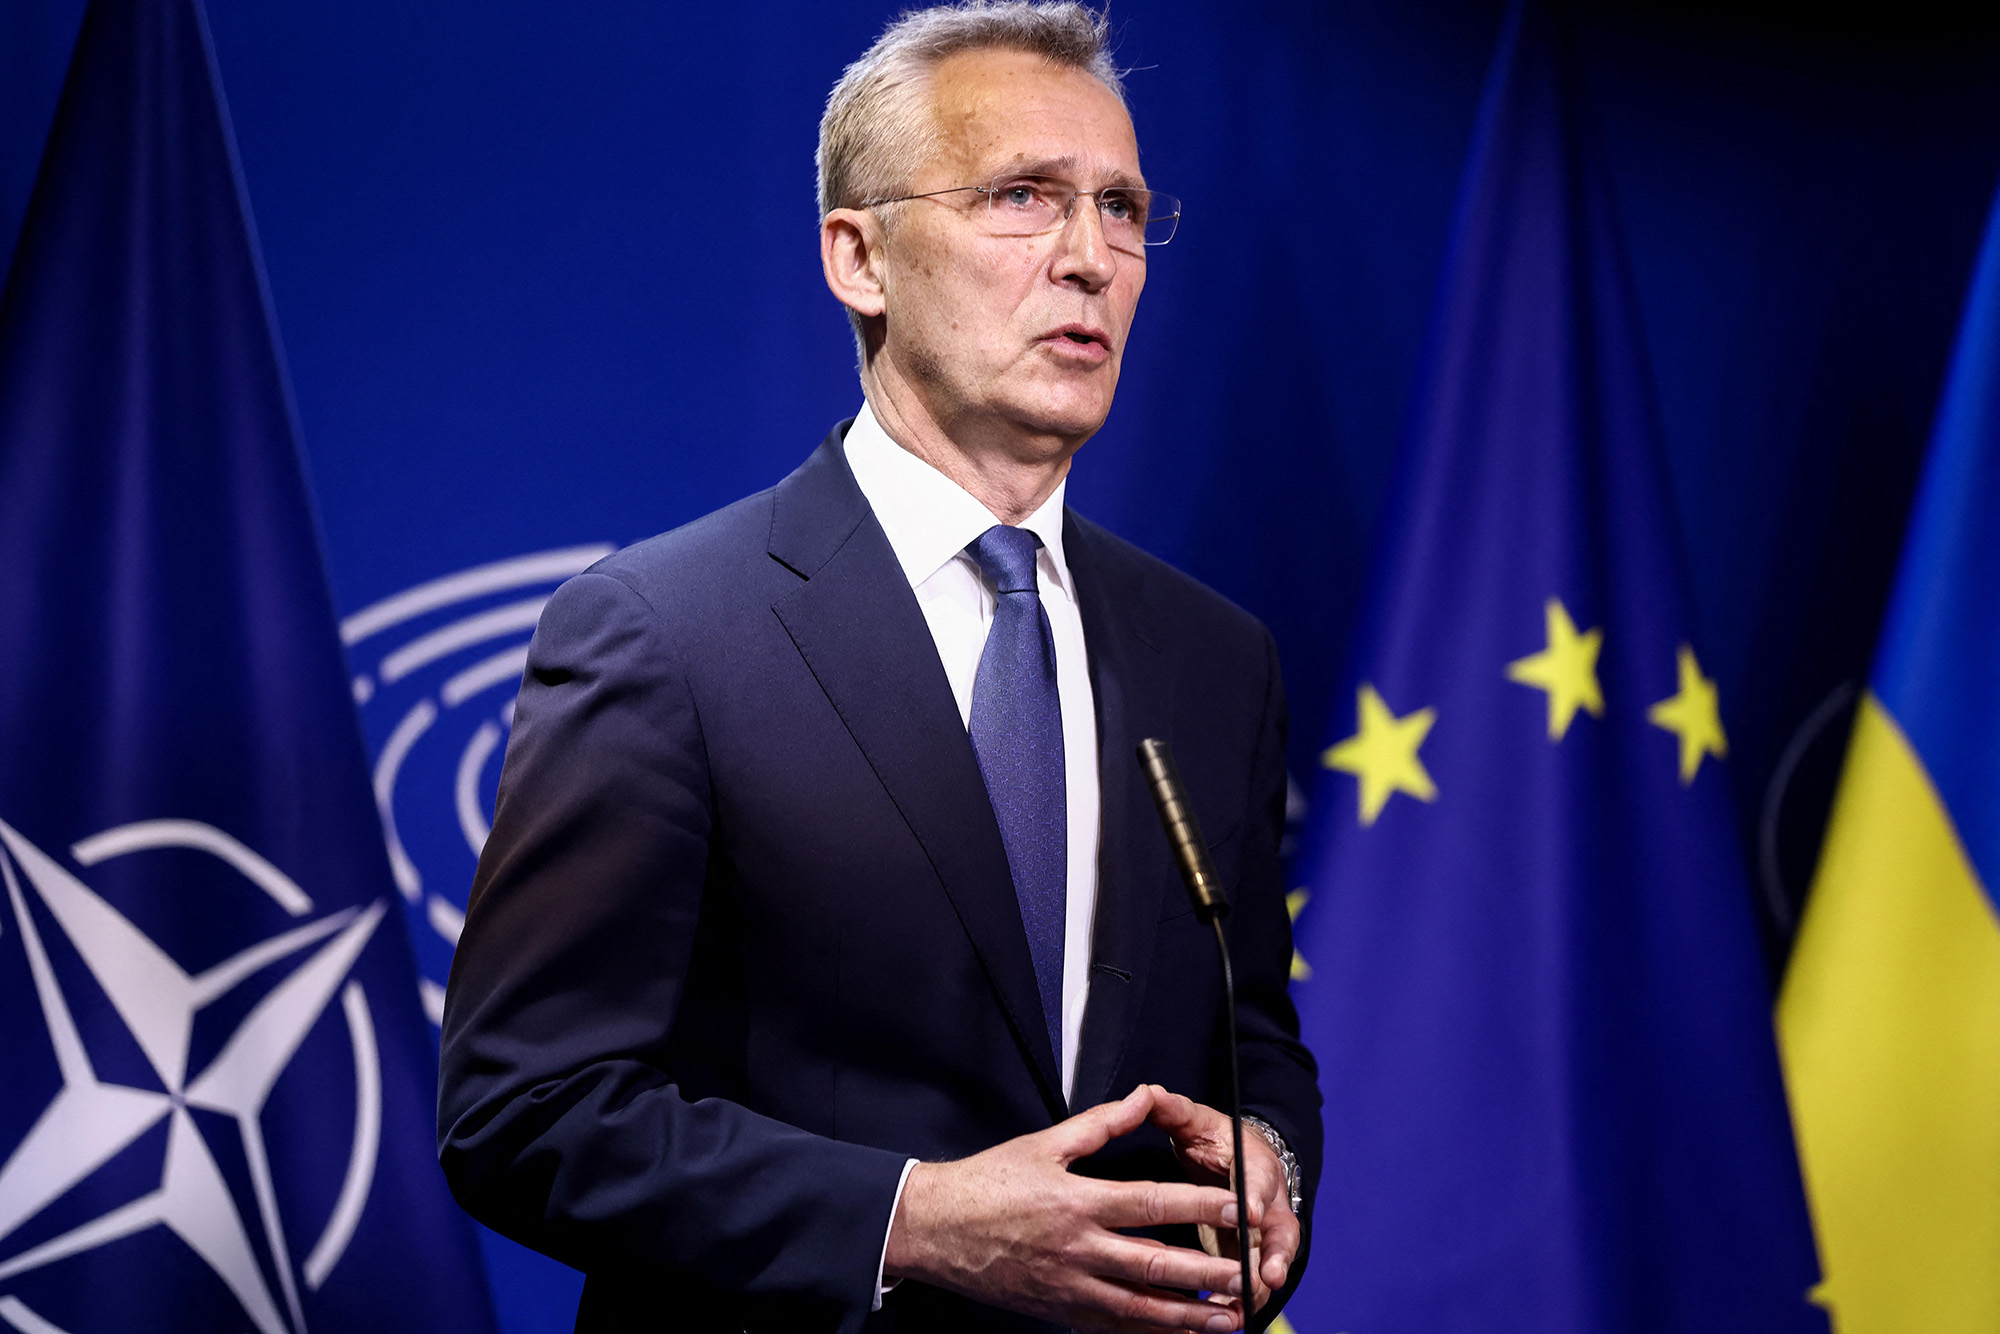 NATO Secretary General Jens Stoltenberg holds a press conference along with the European Parliament president at the European Parliament in Brussels, Belgium, on April 28.